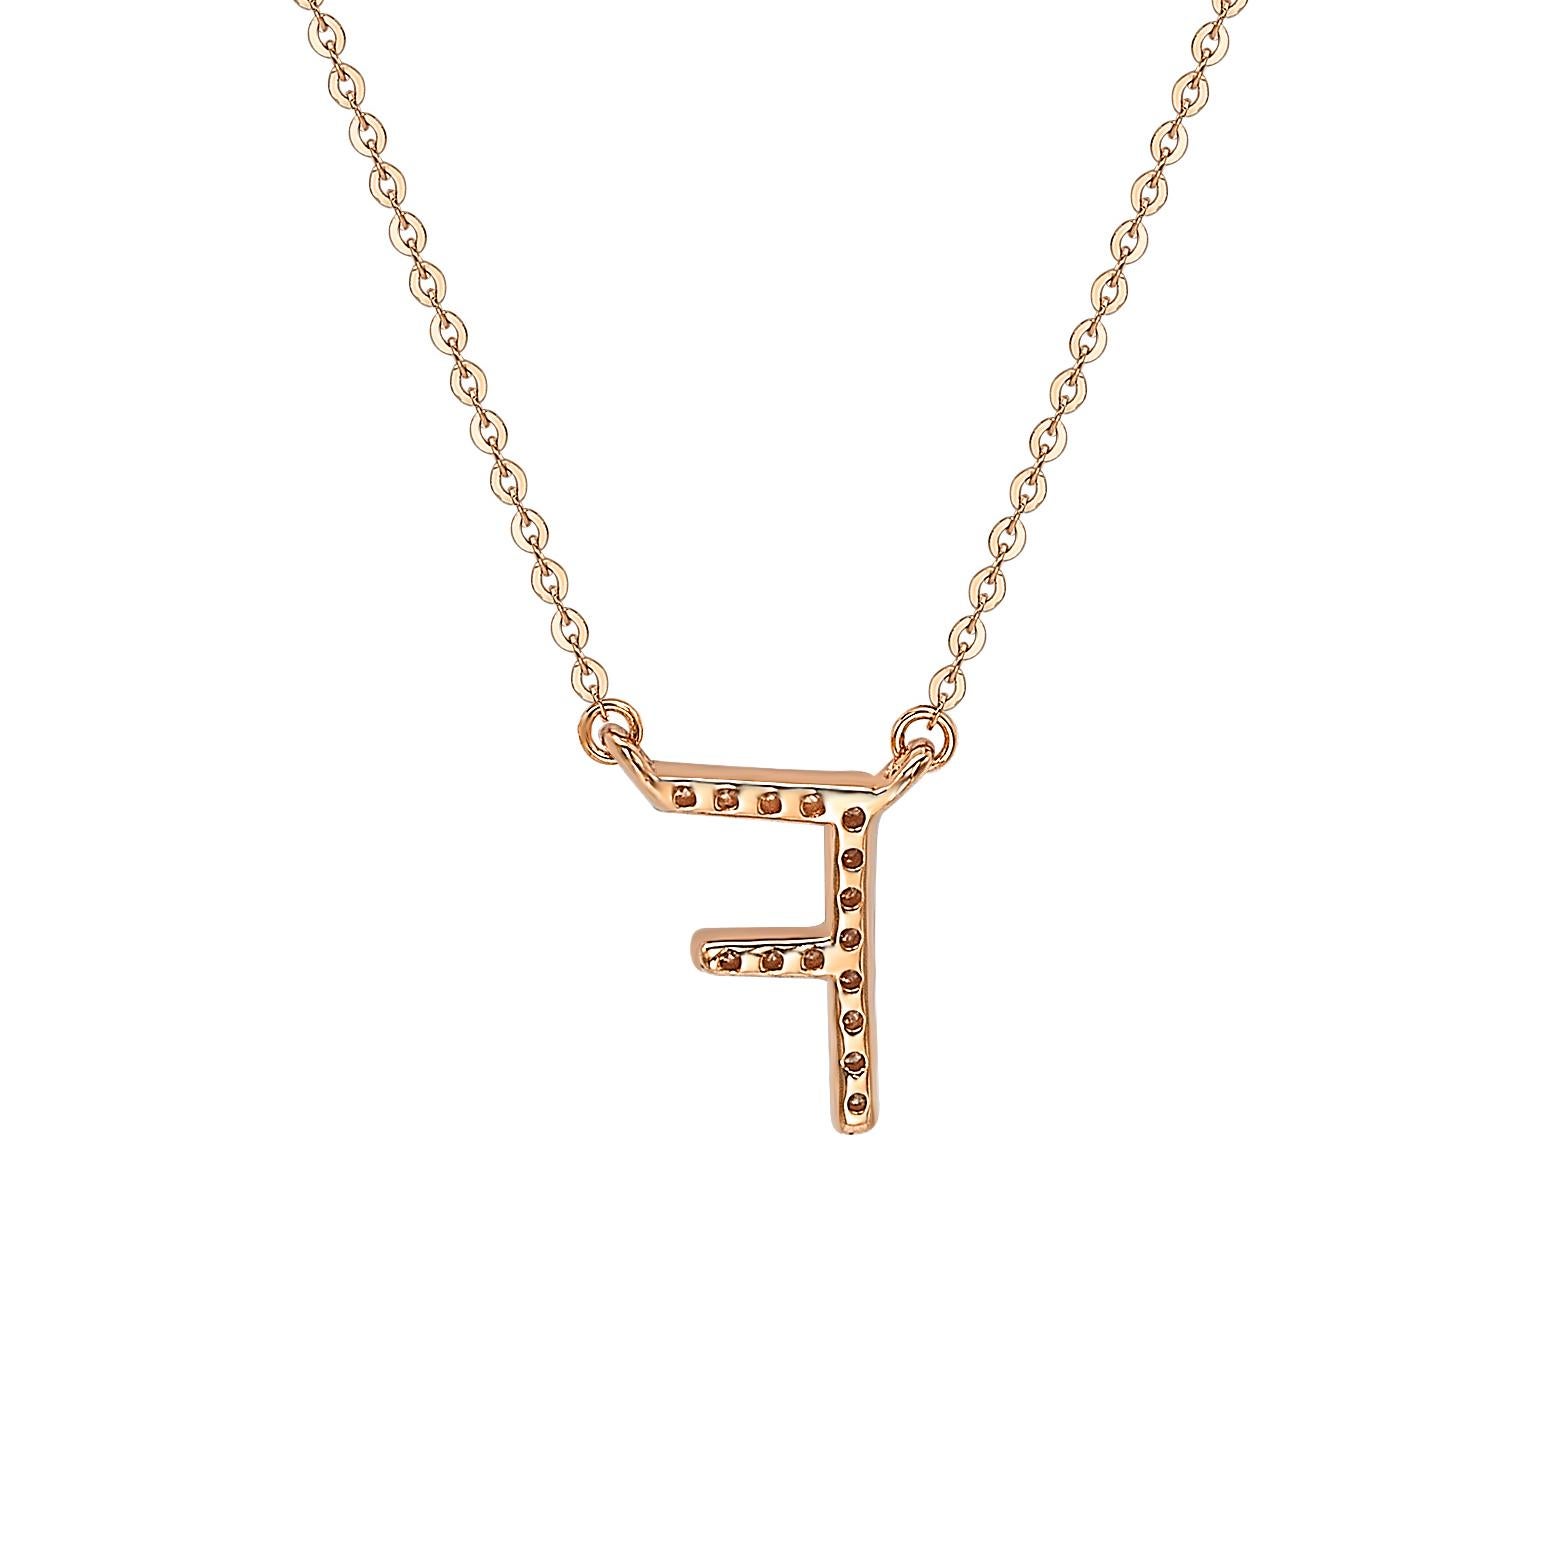 This breathtaking personalized Suzy Levian letter necklace features natural diamonds, hand-set in 14-Karat rose gold. It's the perfect individualized gift to let someone special know you're thinking of them. Each letter necklace features a row of